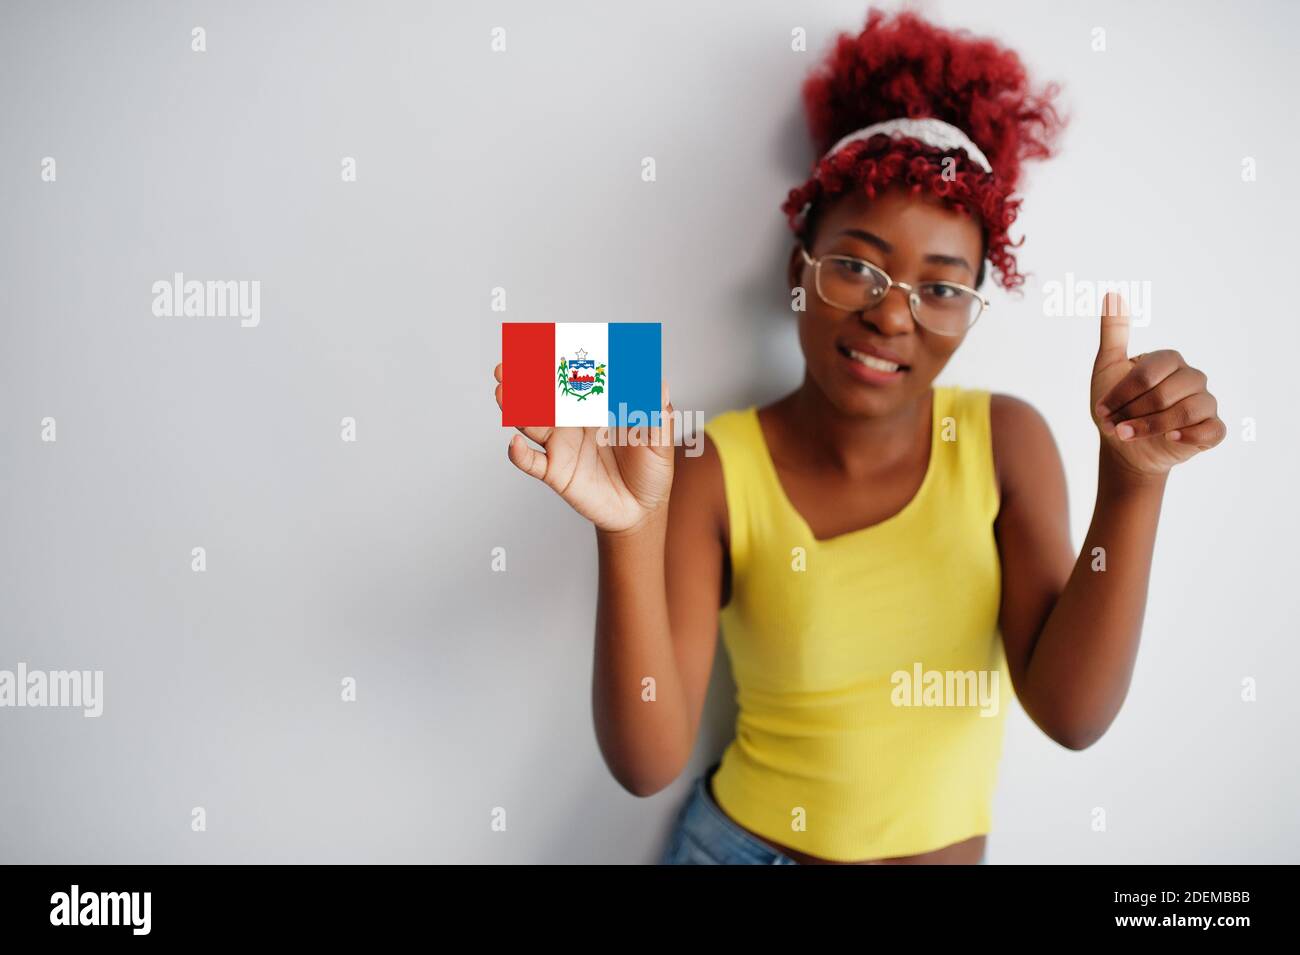 Brazilian woman with afro hair hold Alagoas flag isolated on white background, show thumb up. States of Brazil concept. Stock Photo